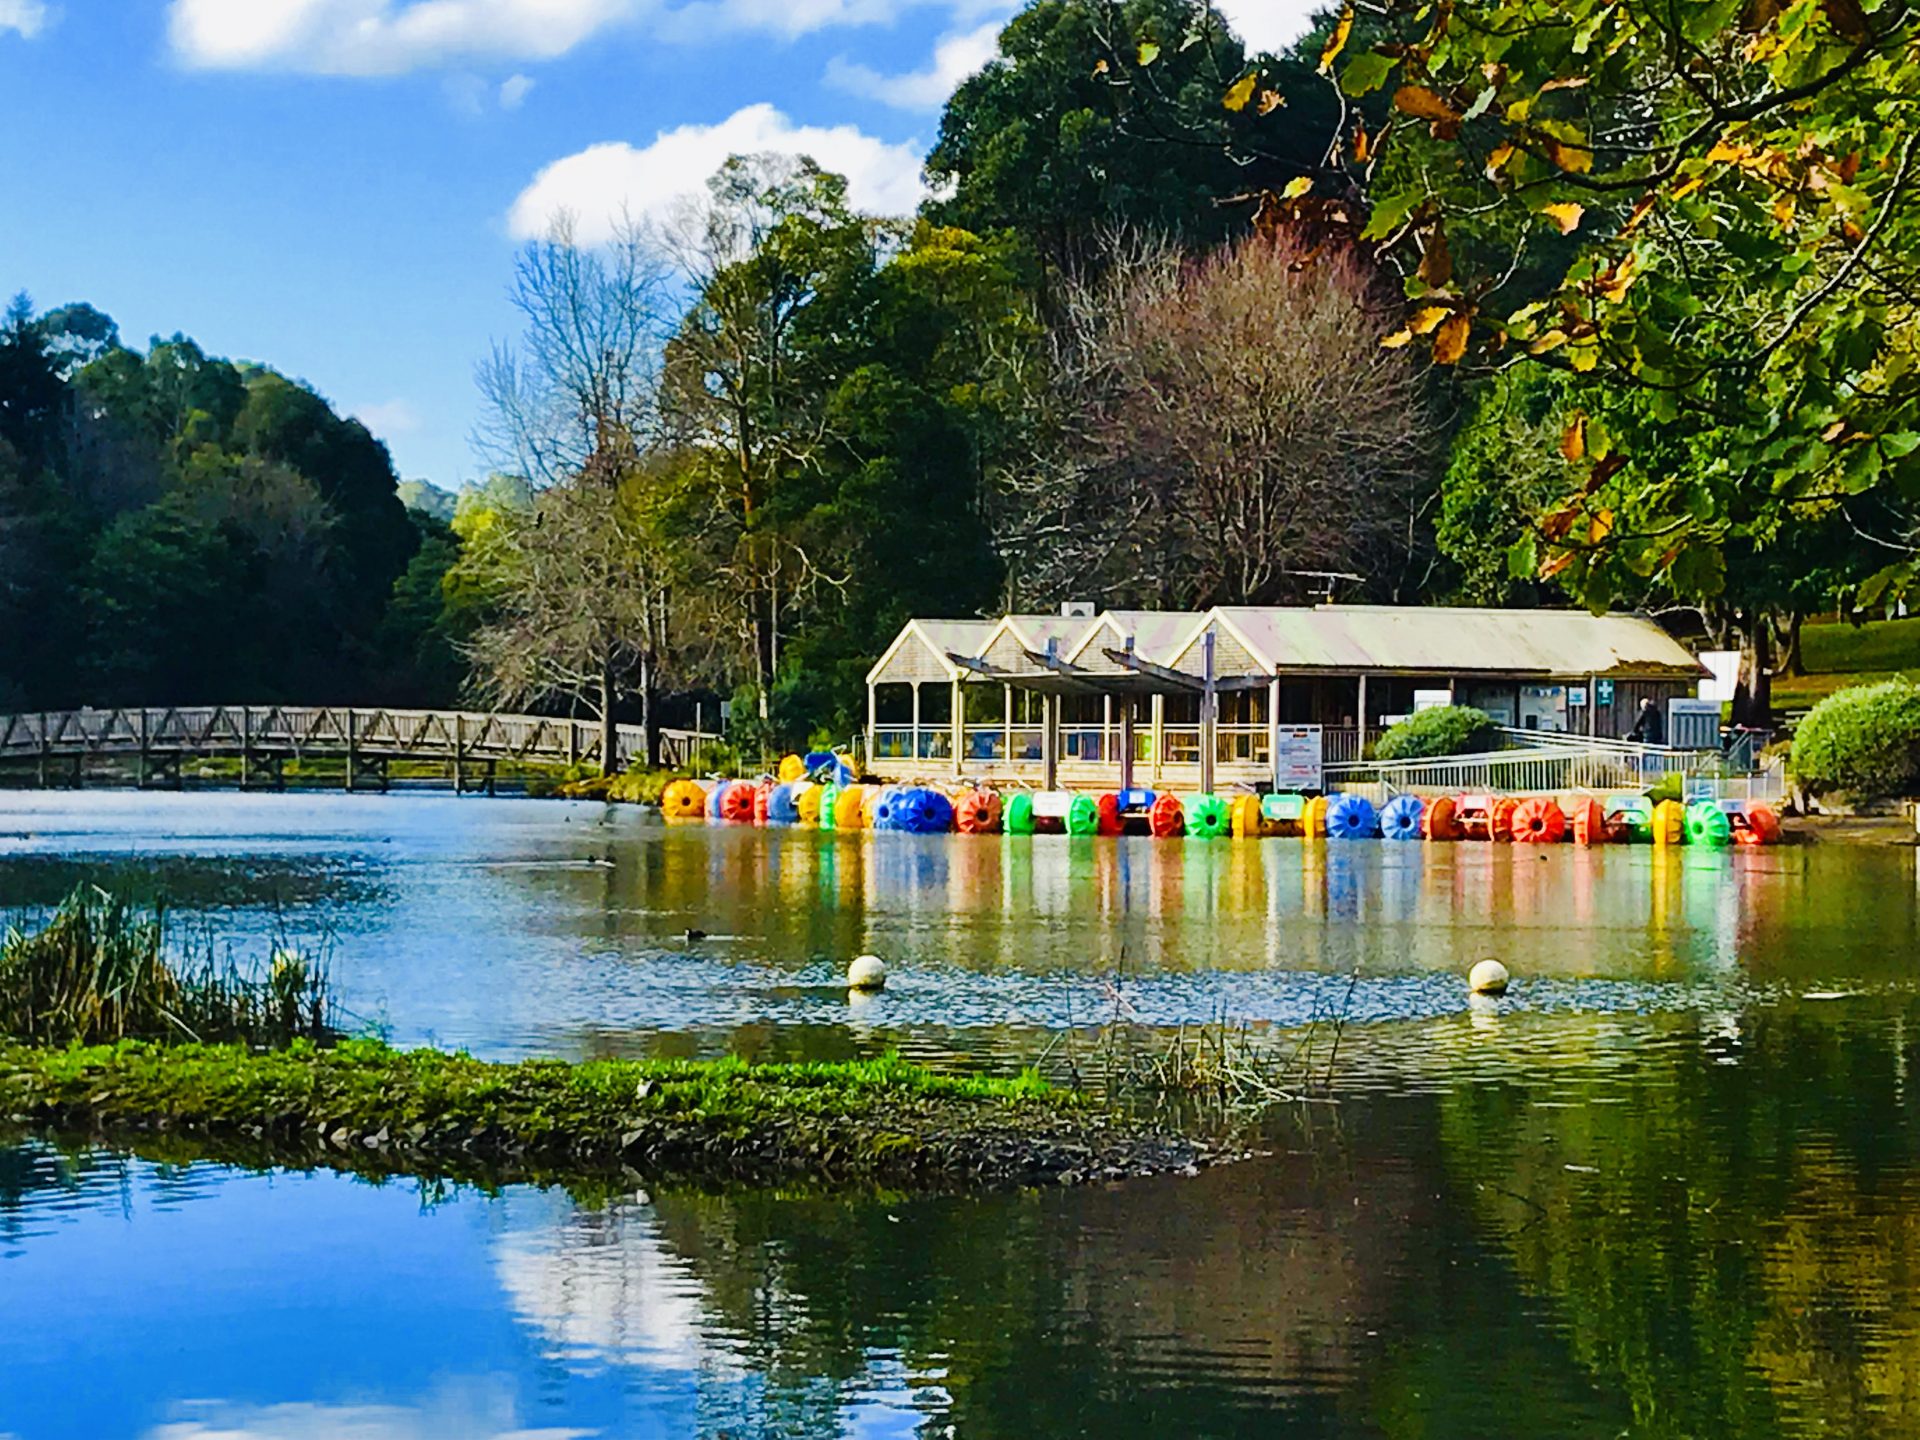 Lakeside Paddleboat - KKDay Title: Top 10 Family Attractions in Melbourne